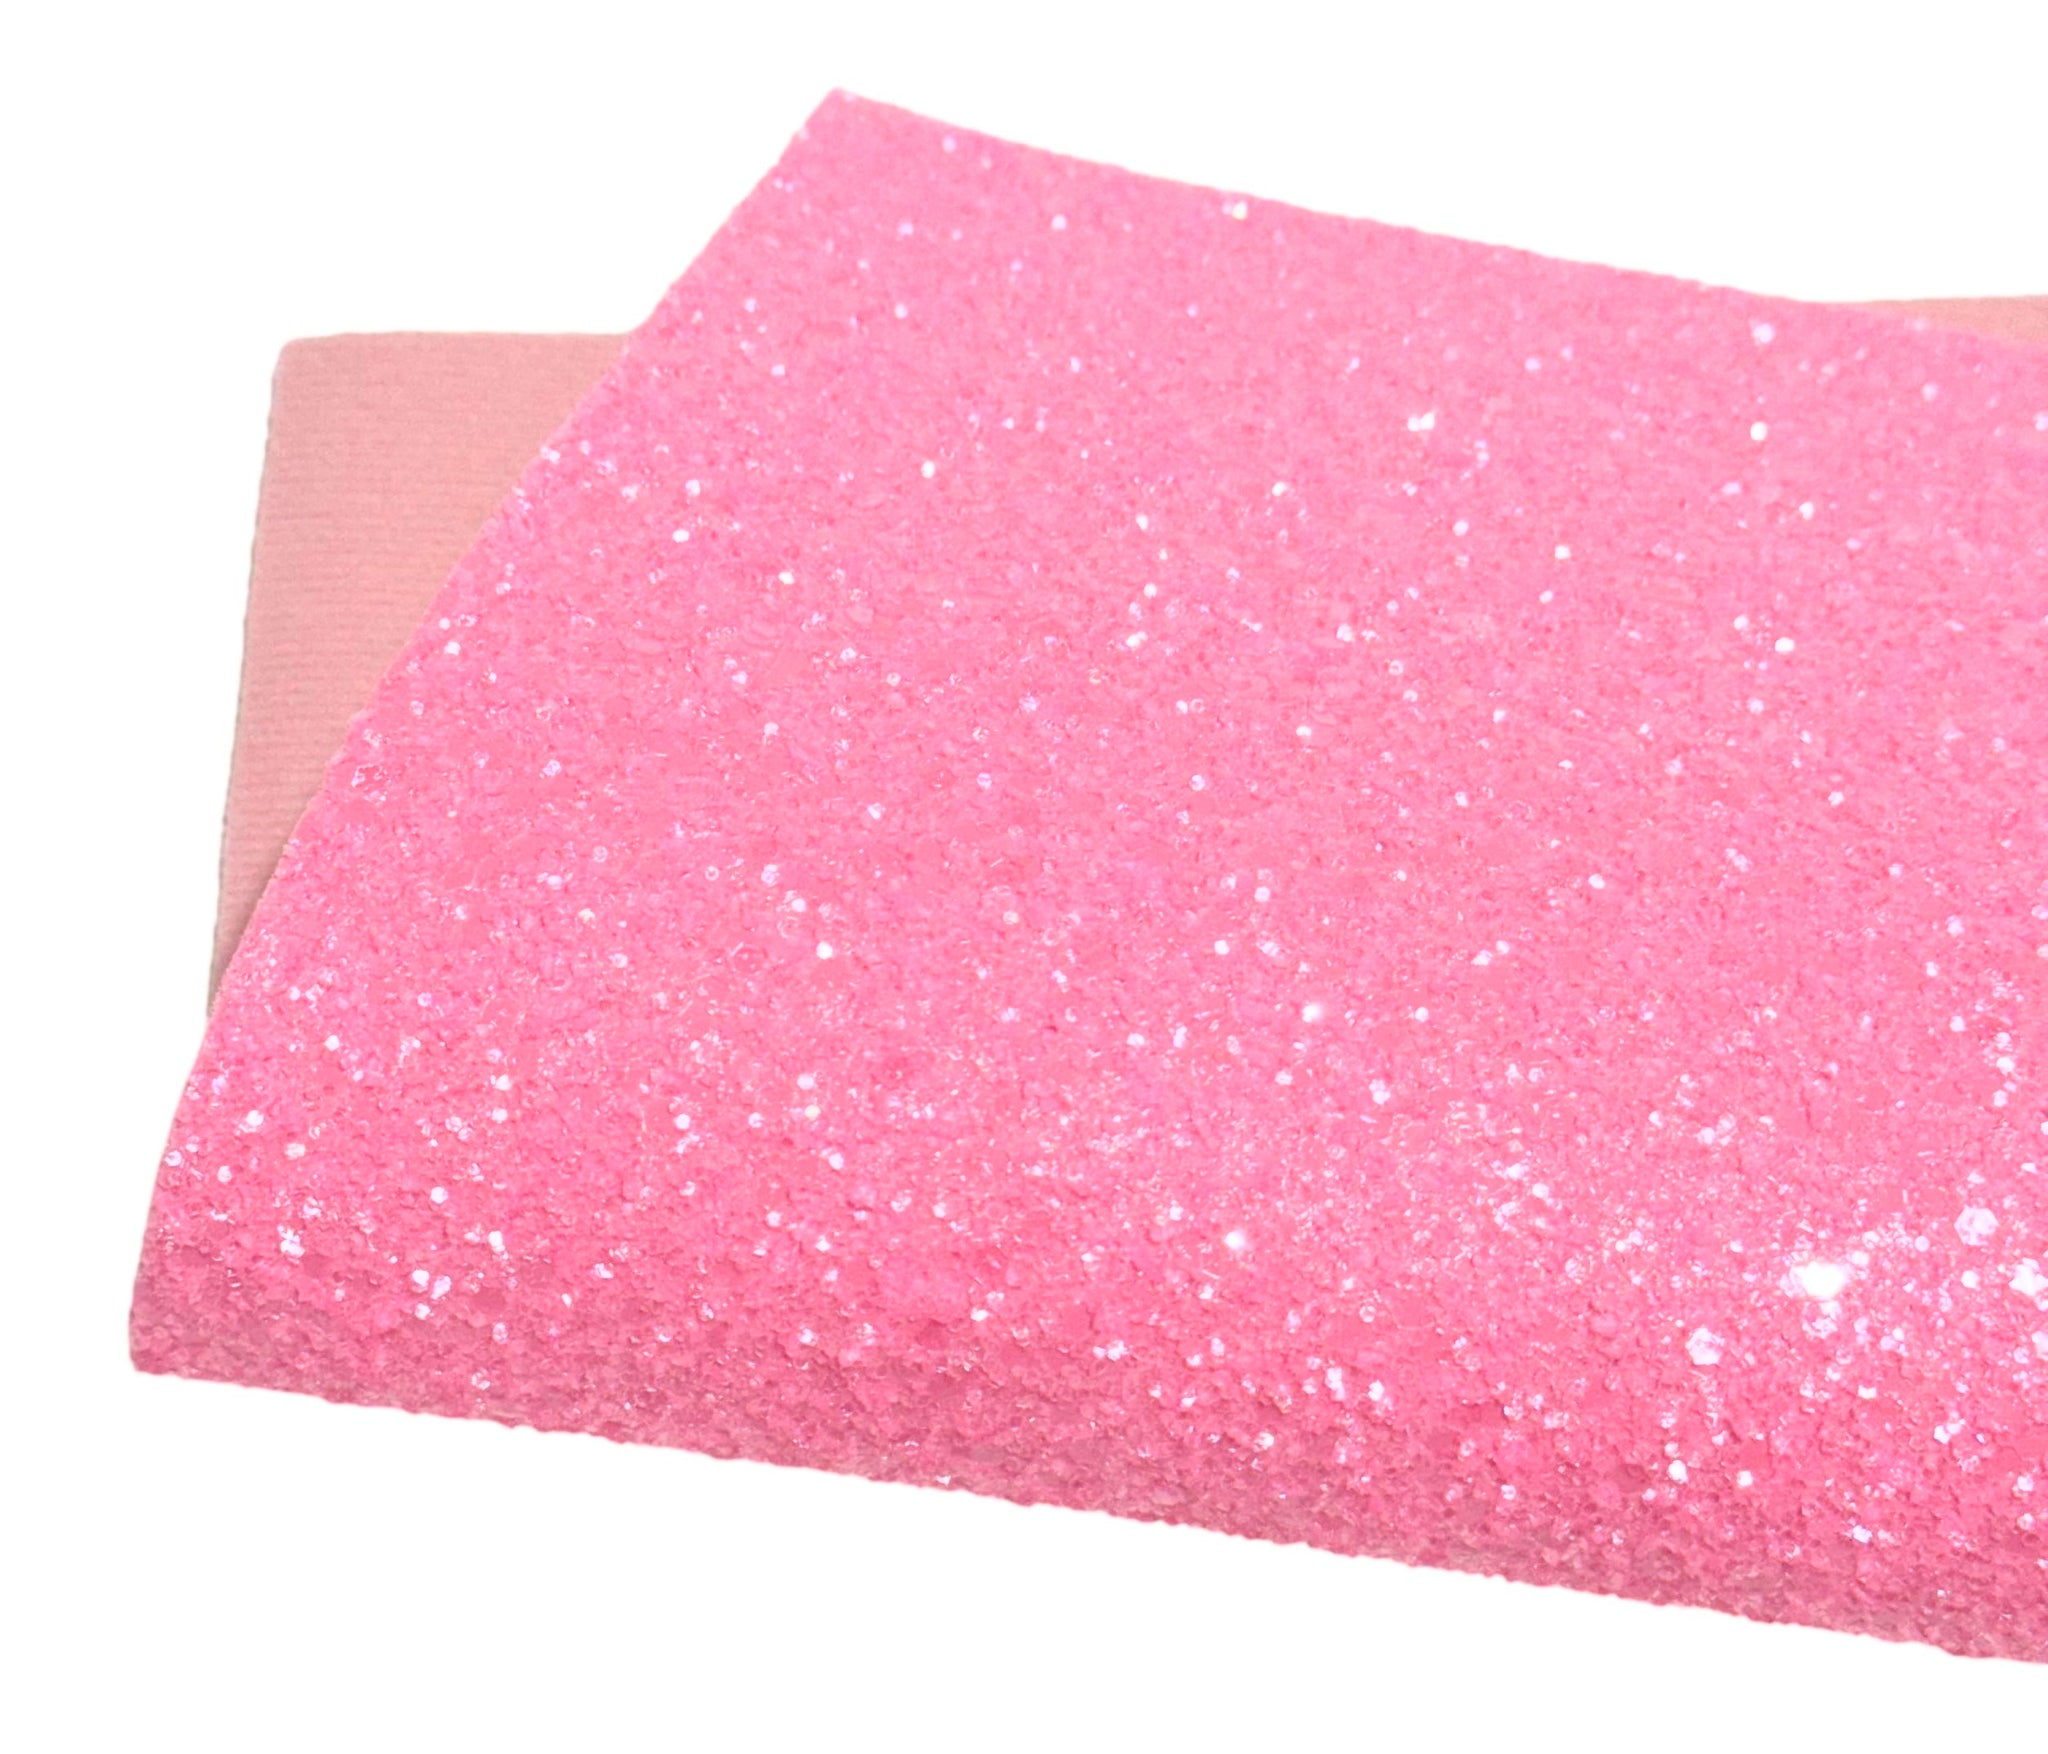 NEW! Bunny Nose Chunky Glitter w/ Pink Felt Backing-READY TO SHIP